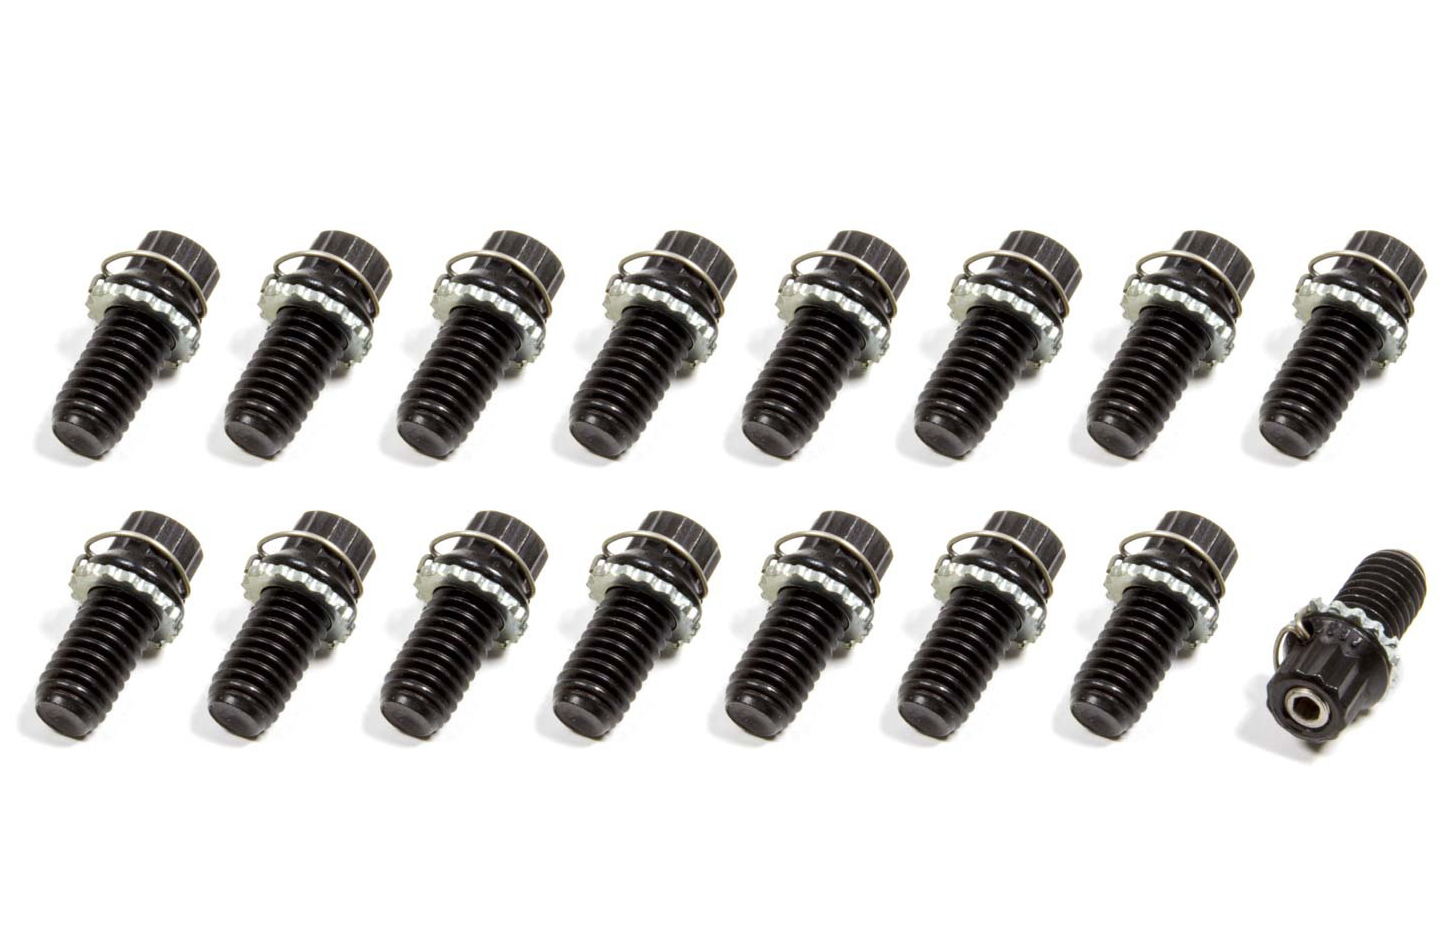 Taylor Cable 310021 Header Bolt, Vibe-Lock, 3/8-16 in Thread, 0.750 in Long, 12 Point Head, Steel, Black Oxide, Set of 16